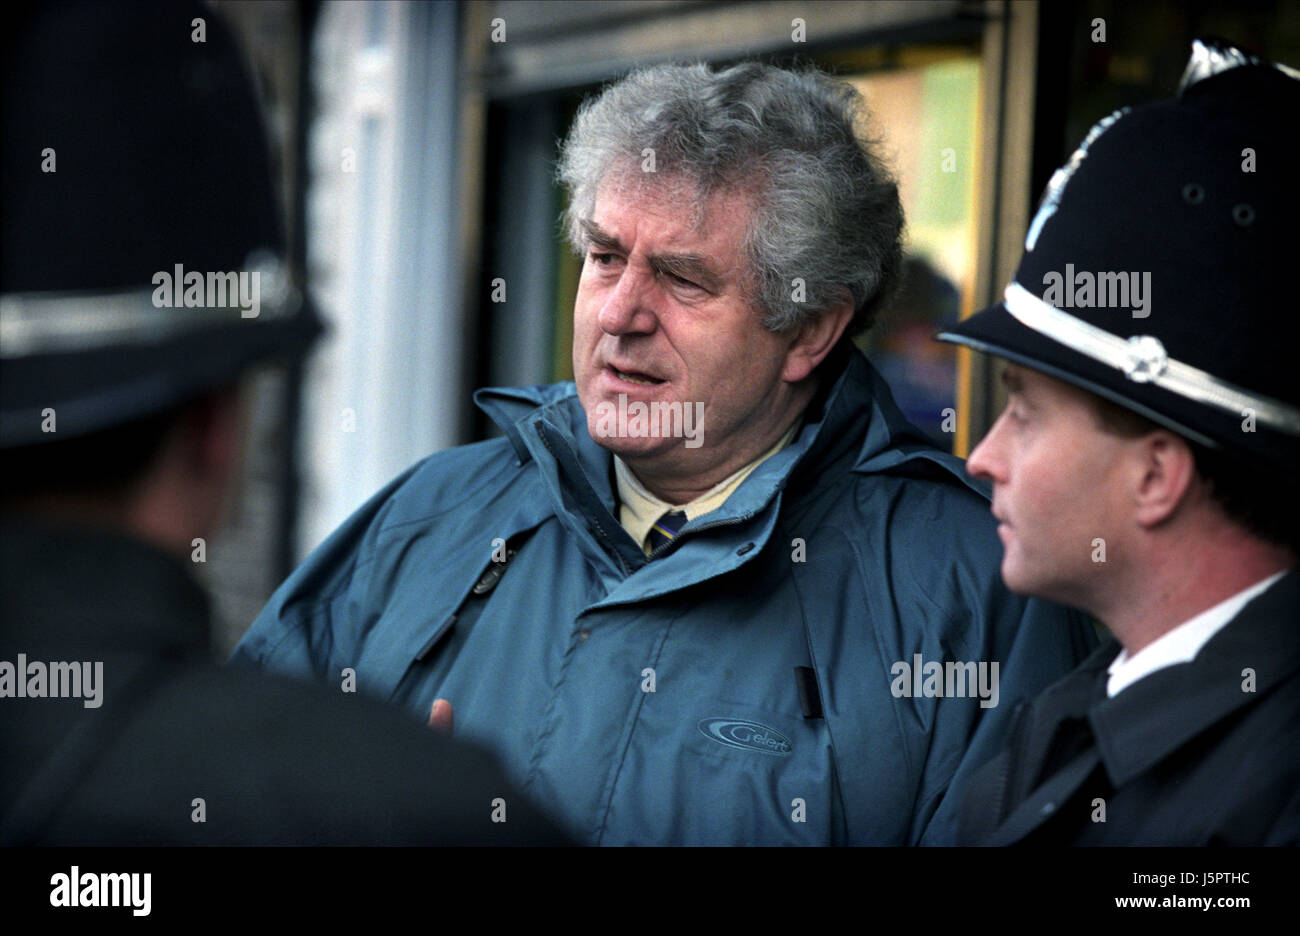 Rhodri Morgan (Labour) the former First Minister of the Welsh Assembly Government (2000 - 2009), meeting policeman during campaigning the second Welsh Assembly Elections. He was largely known as the 'Father of Devolution'. Kiran Ridley/Ethos Stock Photo